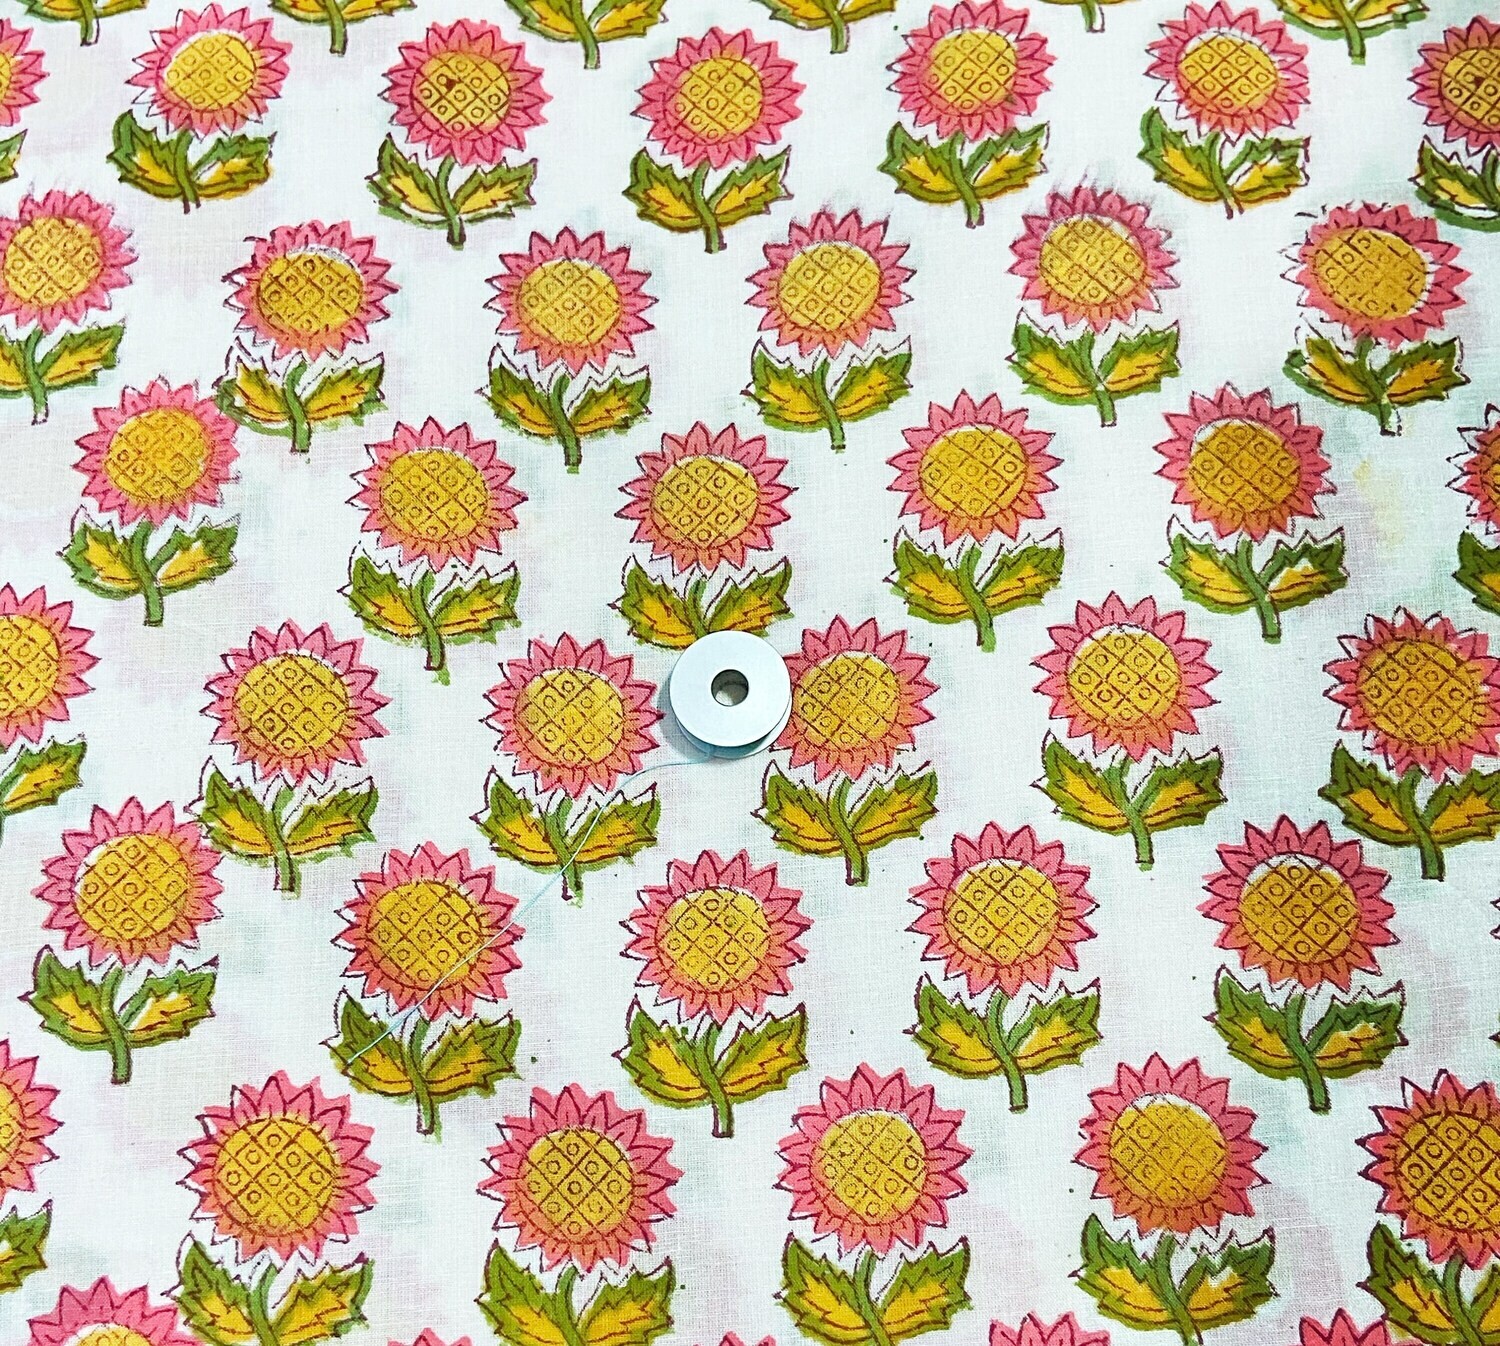 Sunflower Floral Indian Hand Block Print Cotton Fabric, Sewing Quilting Crafting Fabric, 44 Inch Wide, Sold by Half Yard